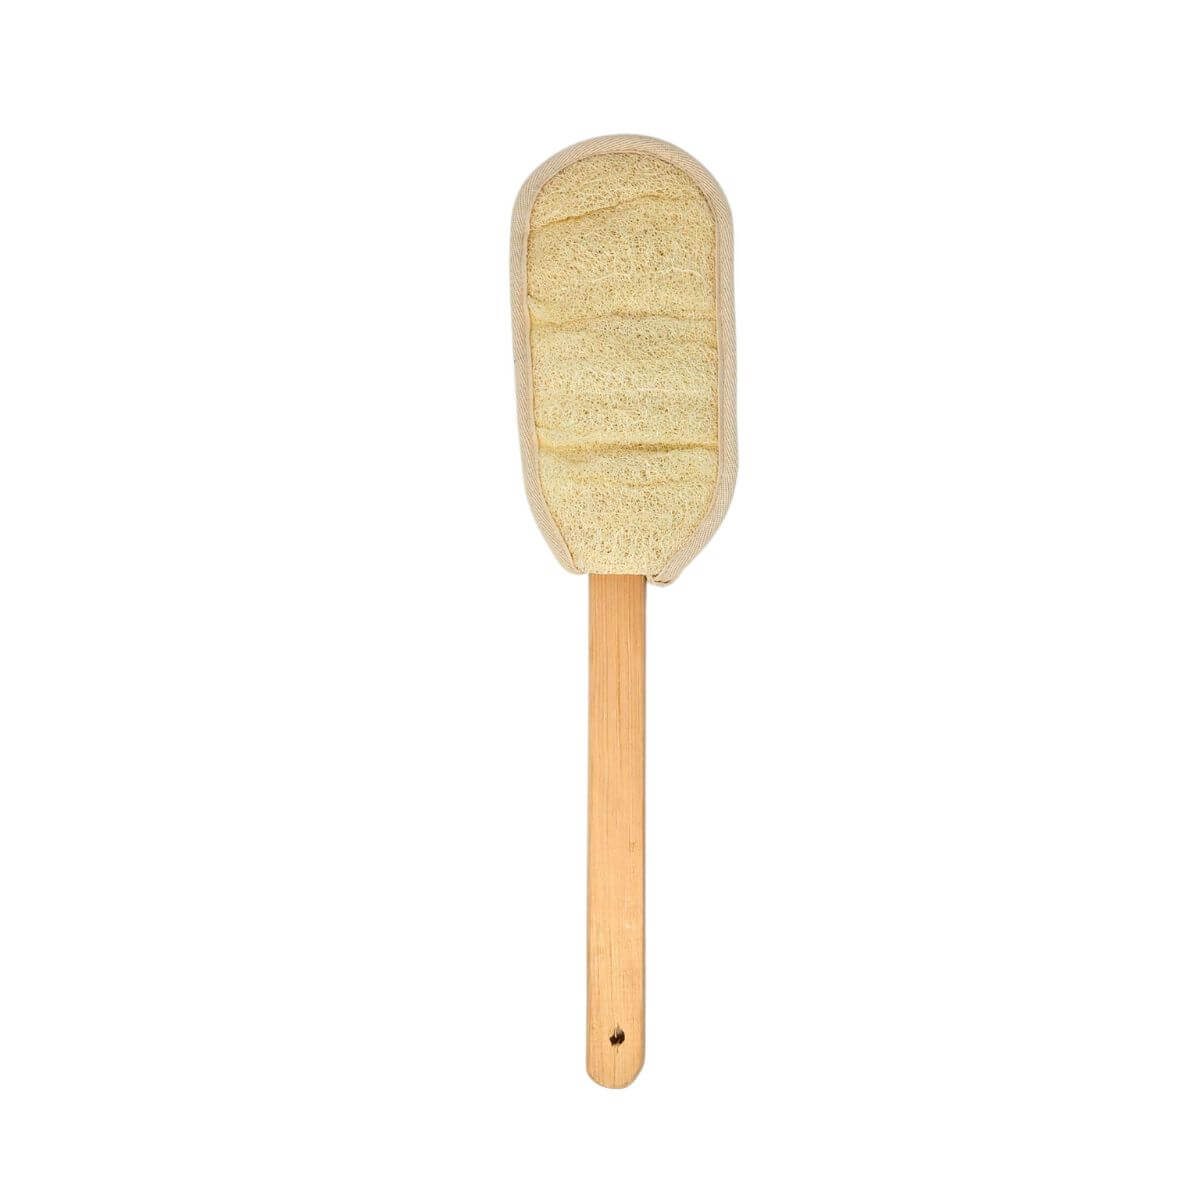 Wooden handle loofah back scrubber - Loofah side